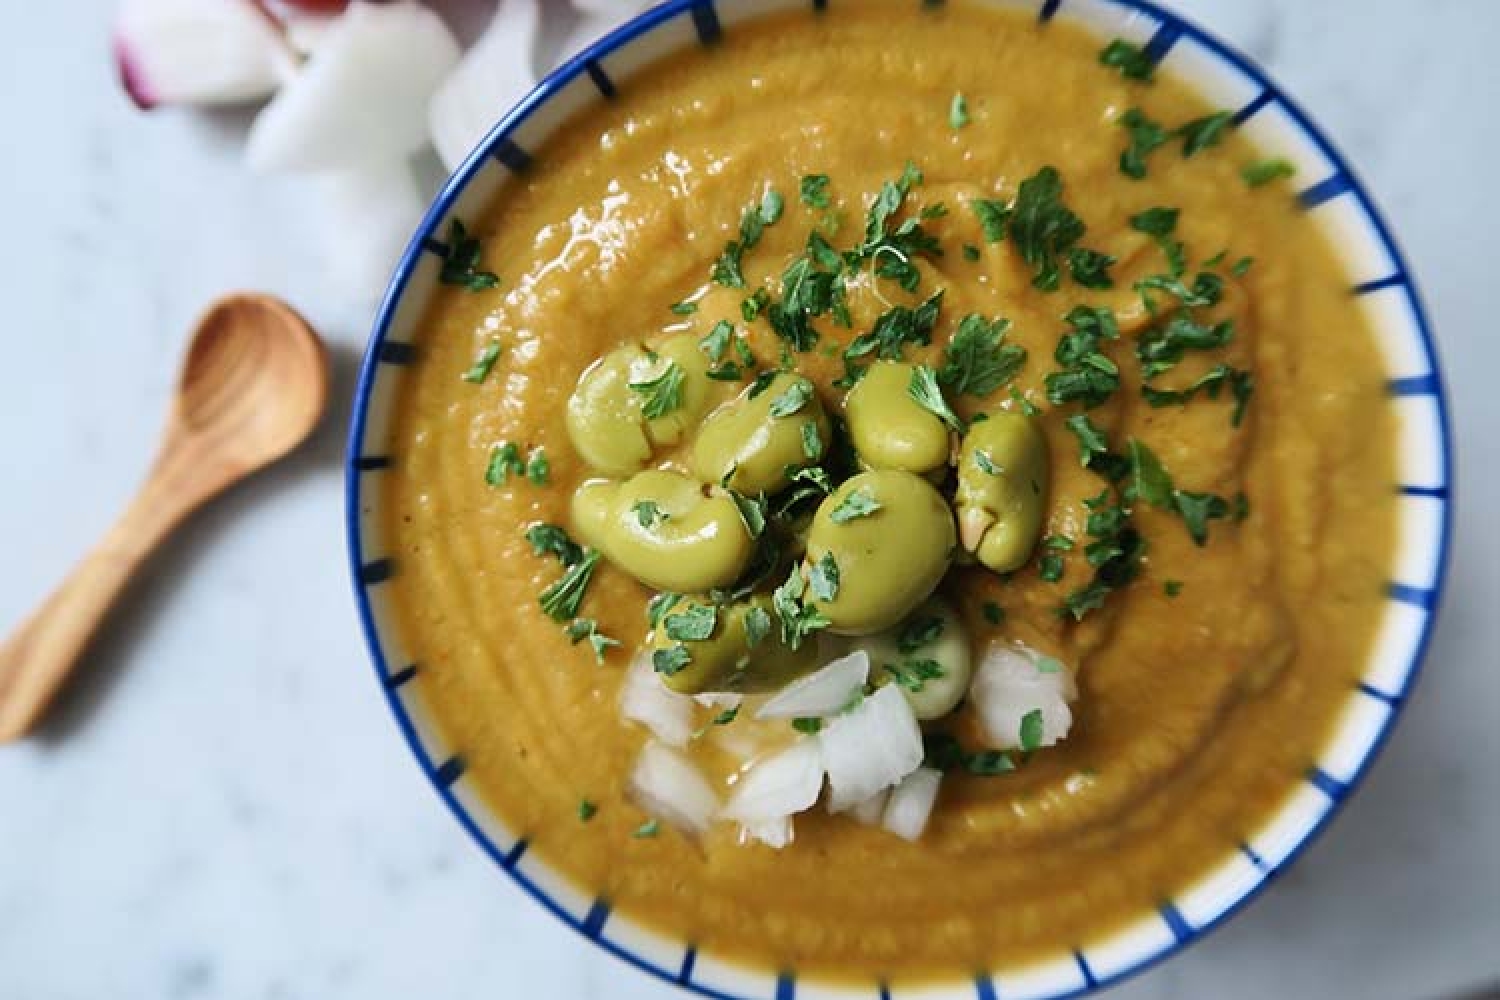 <p>This Mexican soup made with creamy, earthy fava beans will warm you up in the best way. Flavored with aromatic crushed saffron and ground cumin, it uses a traditional <em>recado </em>(spice paste) base that you'll want to use in all of your Mexican-style dishes. <a href="https://thegreencreator.com/mexican-fava-bean-soup/" rel="noopener">Get the recipe here.</a></p>